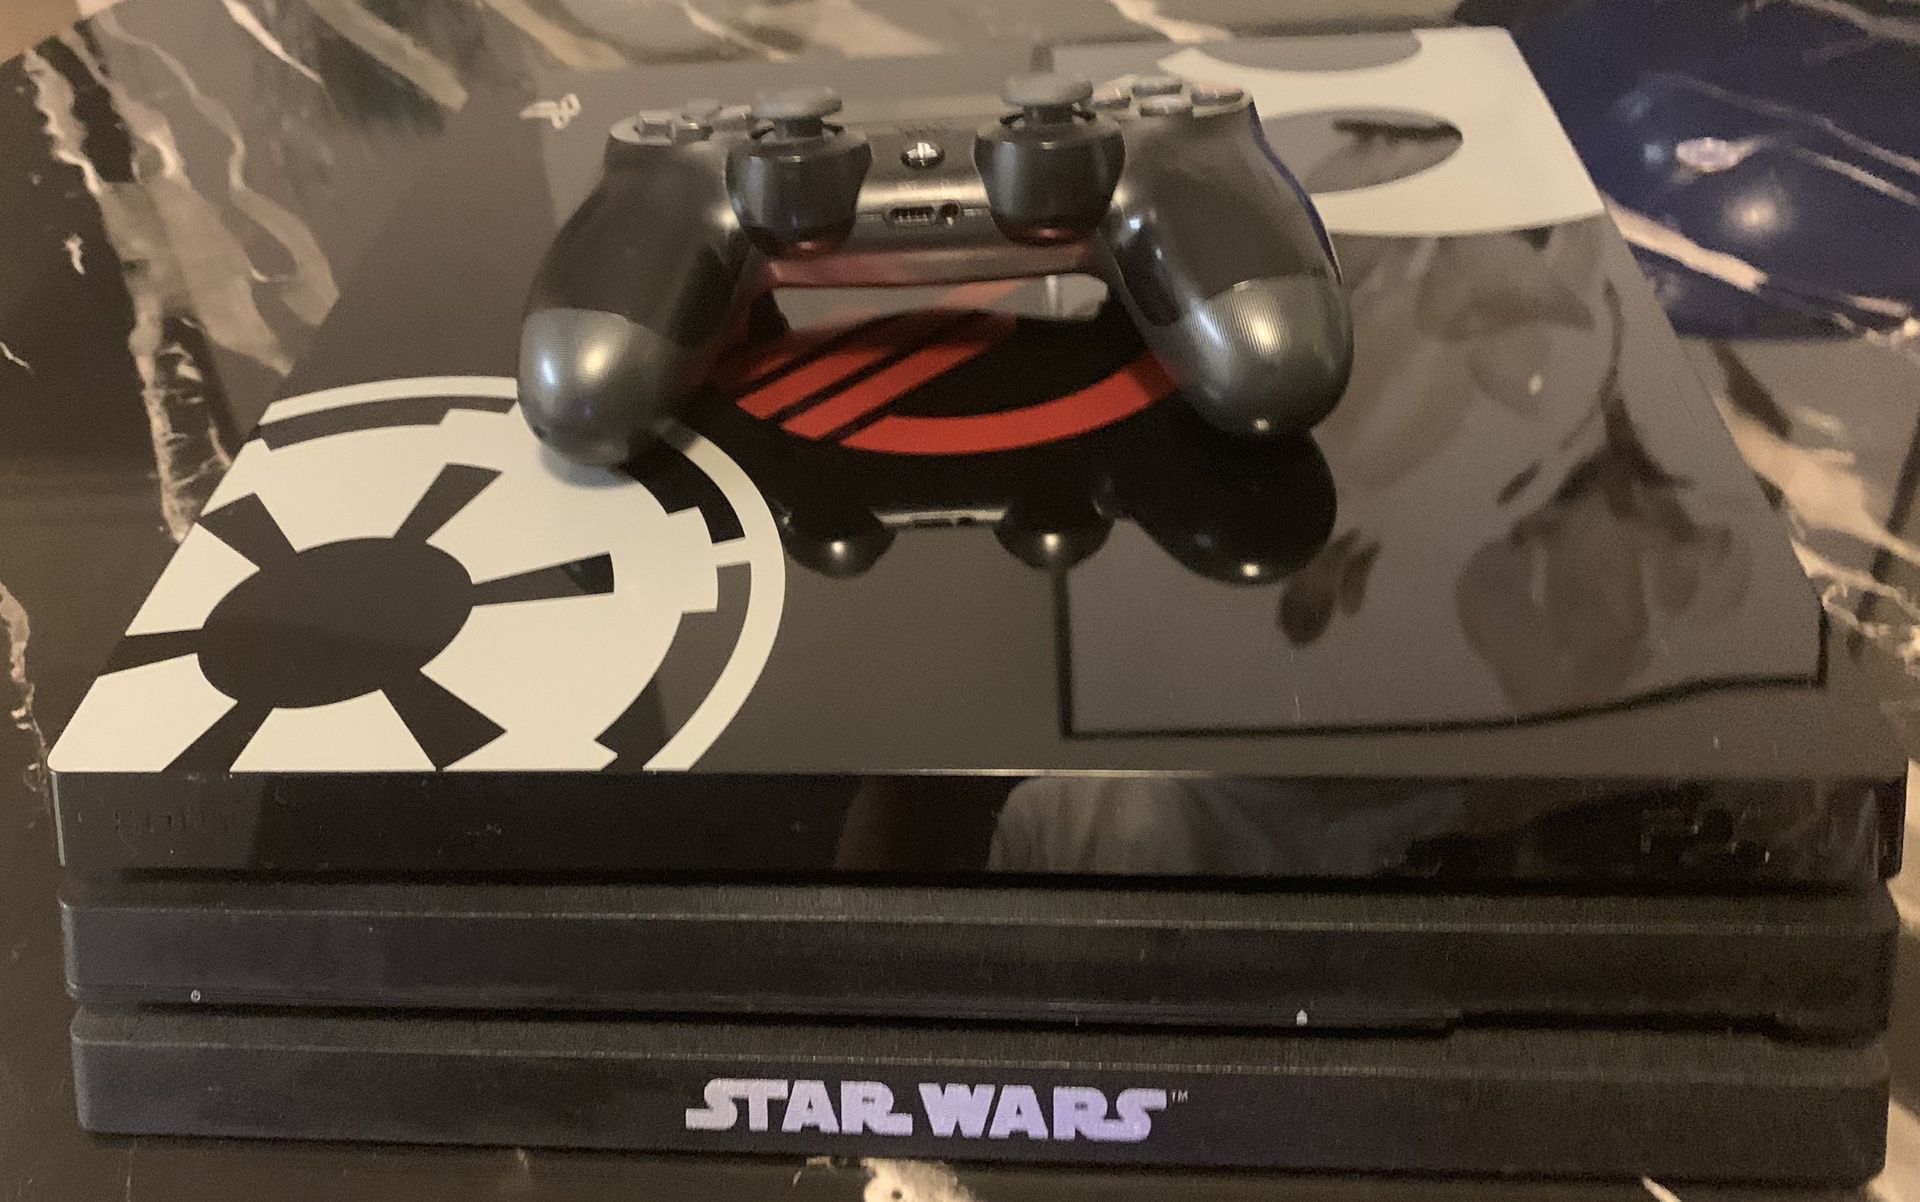 PS4 PRO Star Wars edition